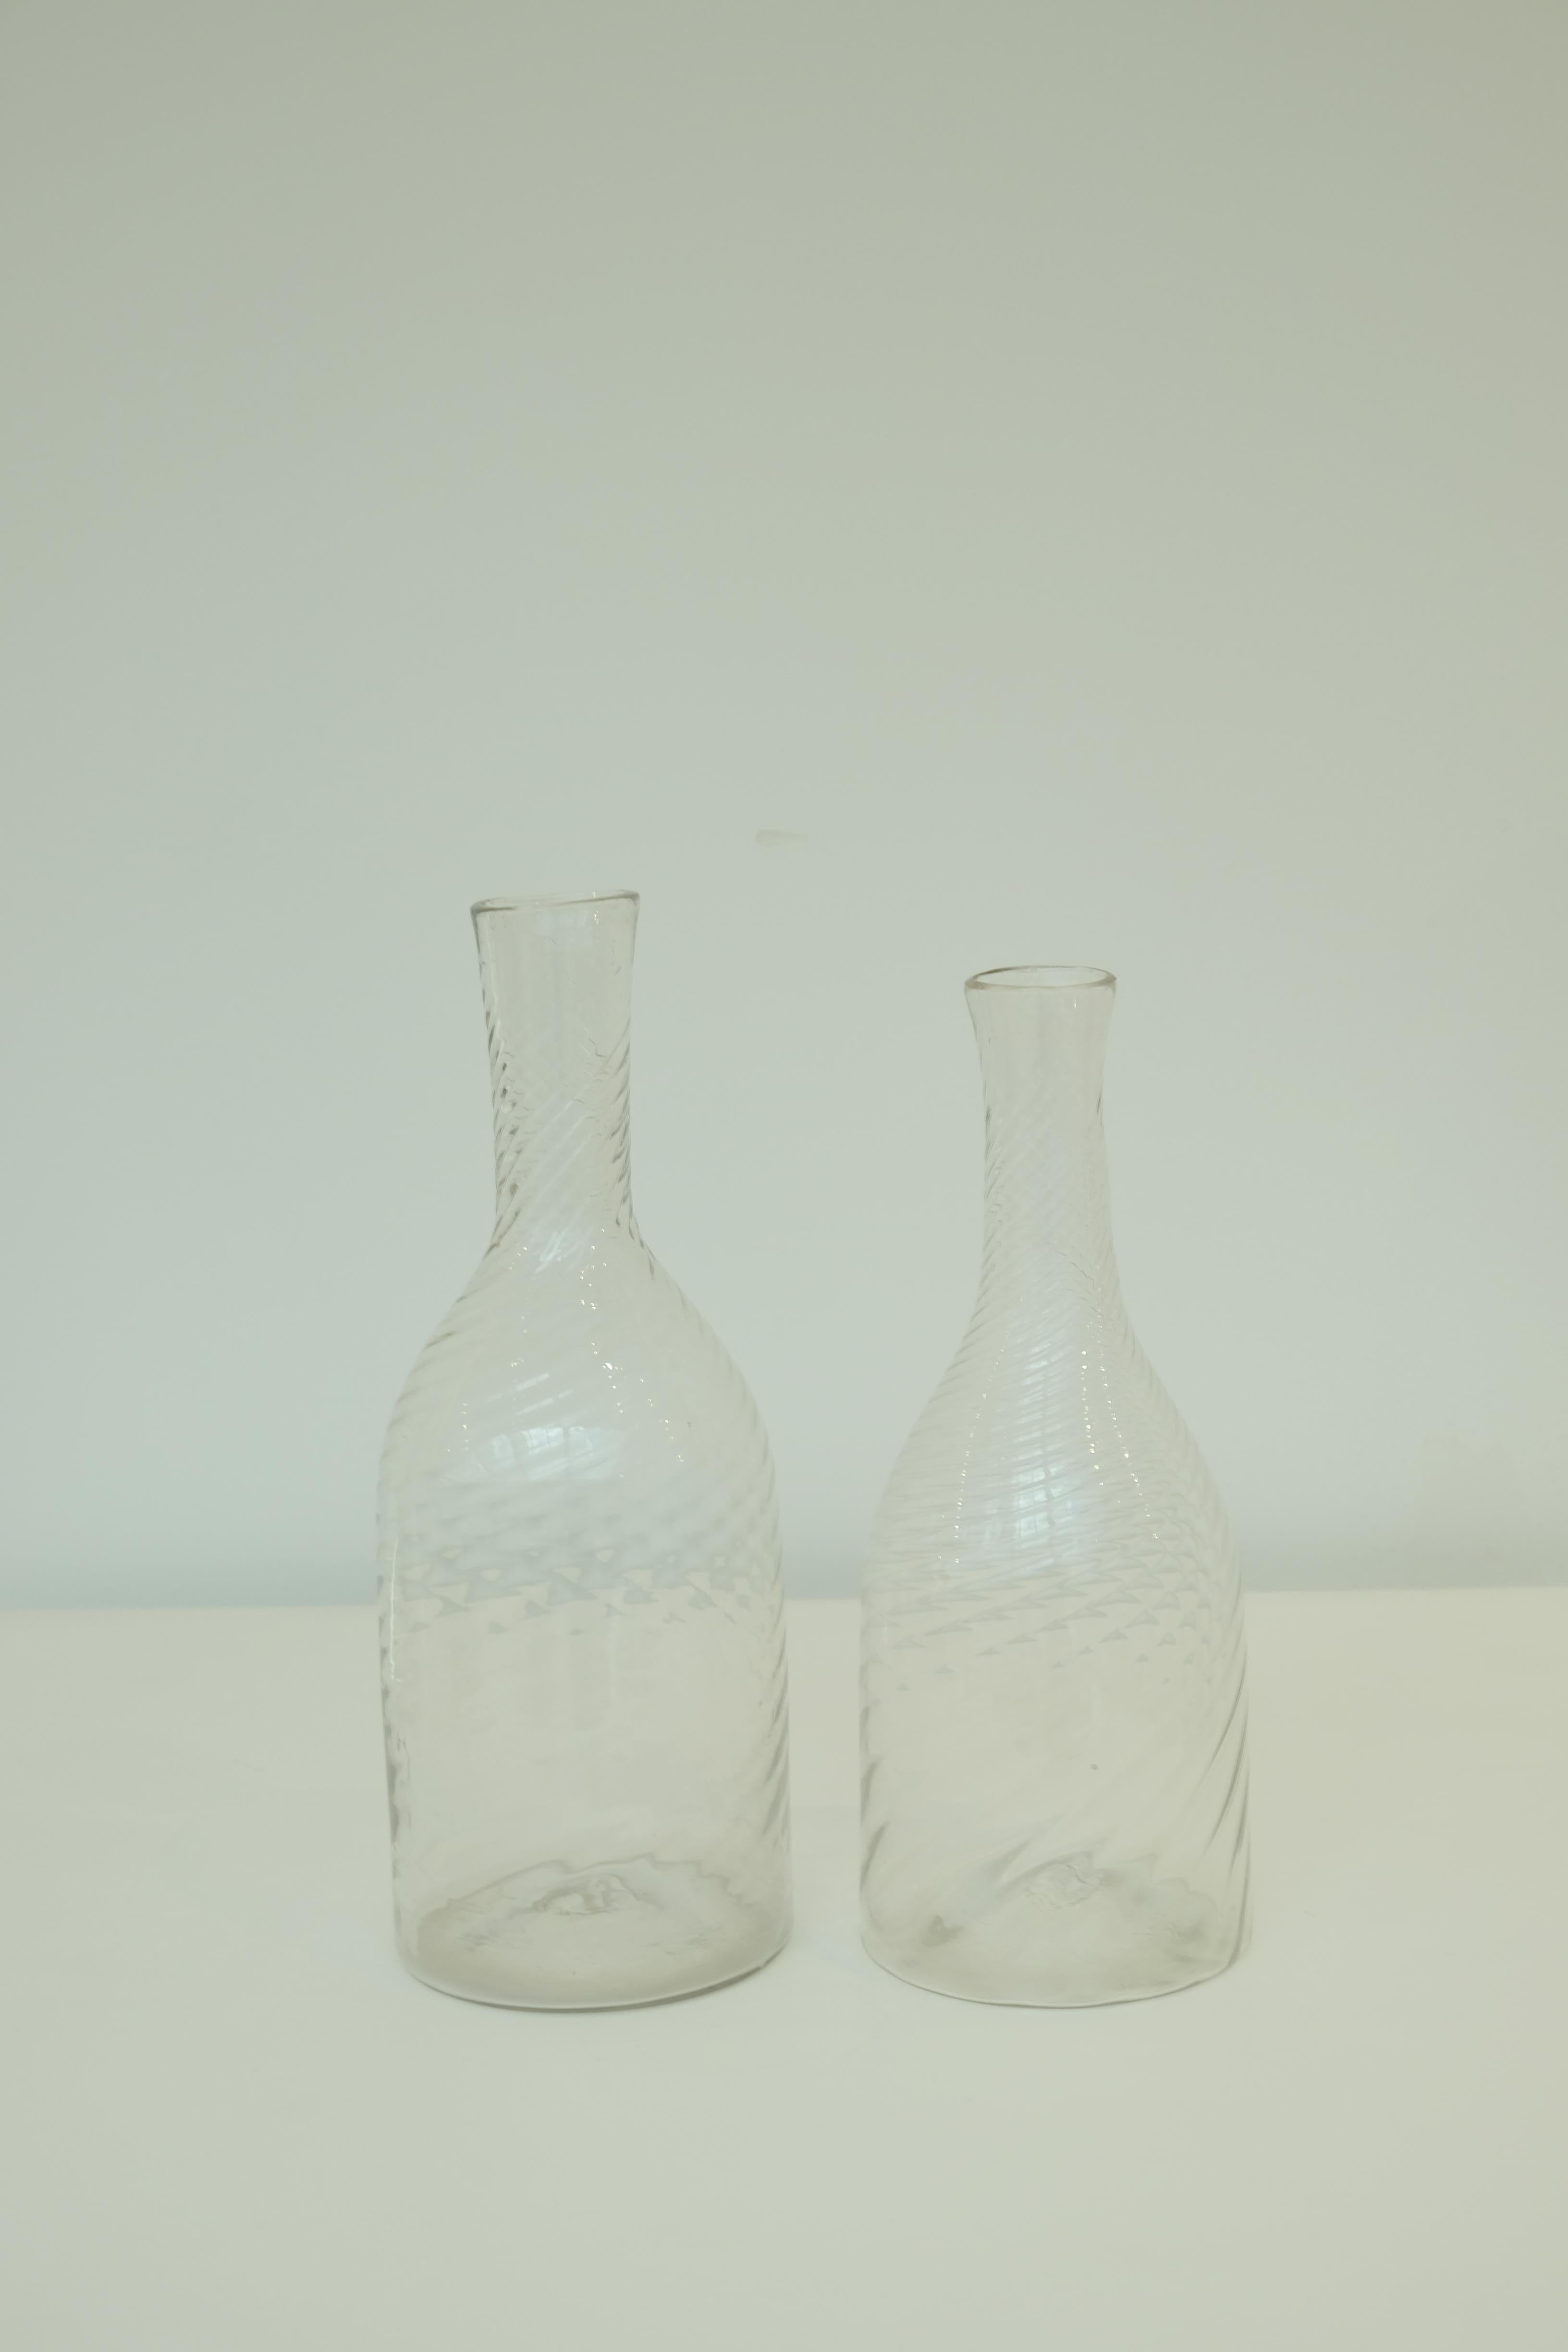 Scandinavian glass decanters, circa 1880. When water is poured from the decanter, it causes a wonderful swirl effect to the stream. Classical, modern and so elegant.